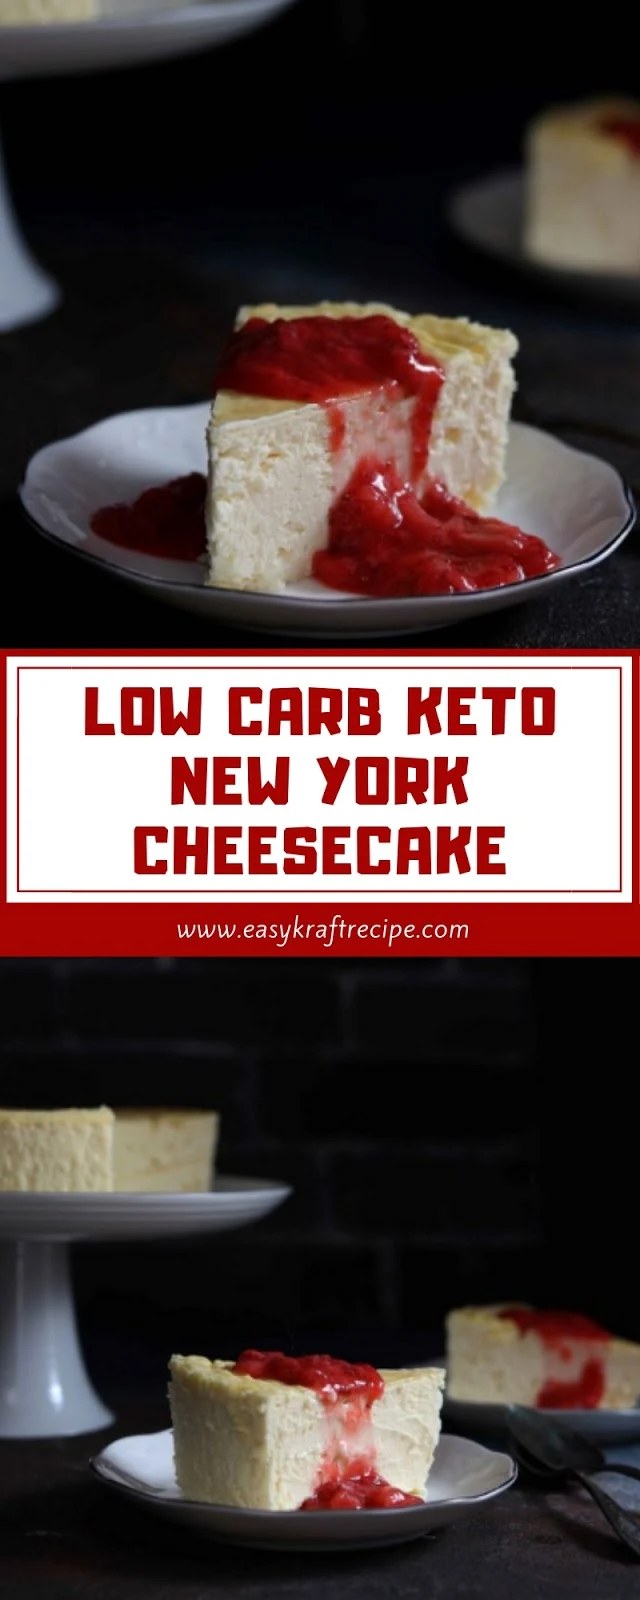 LOW CARB KETO NEW YORK CHEESECAKE